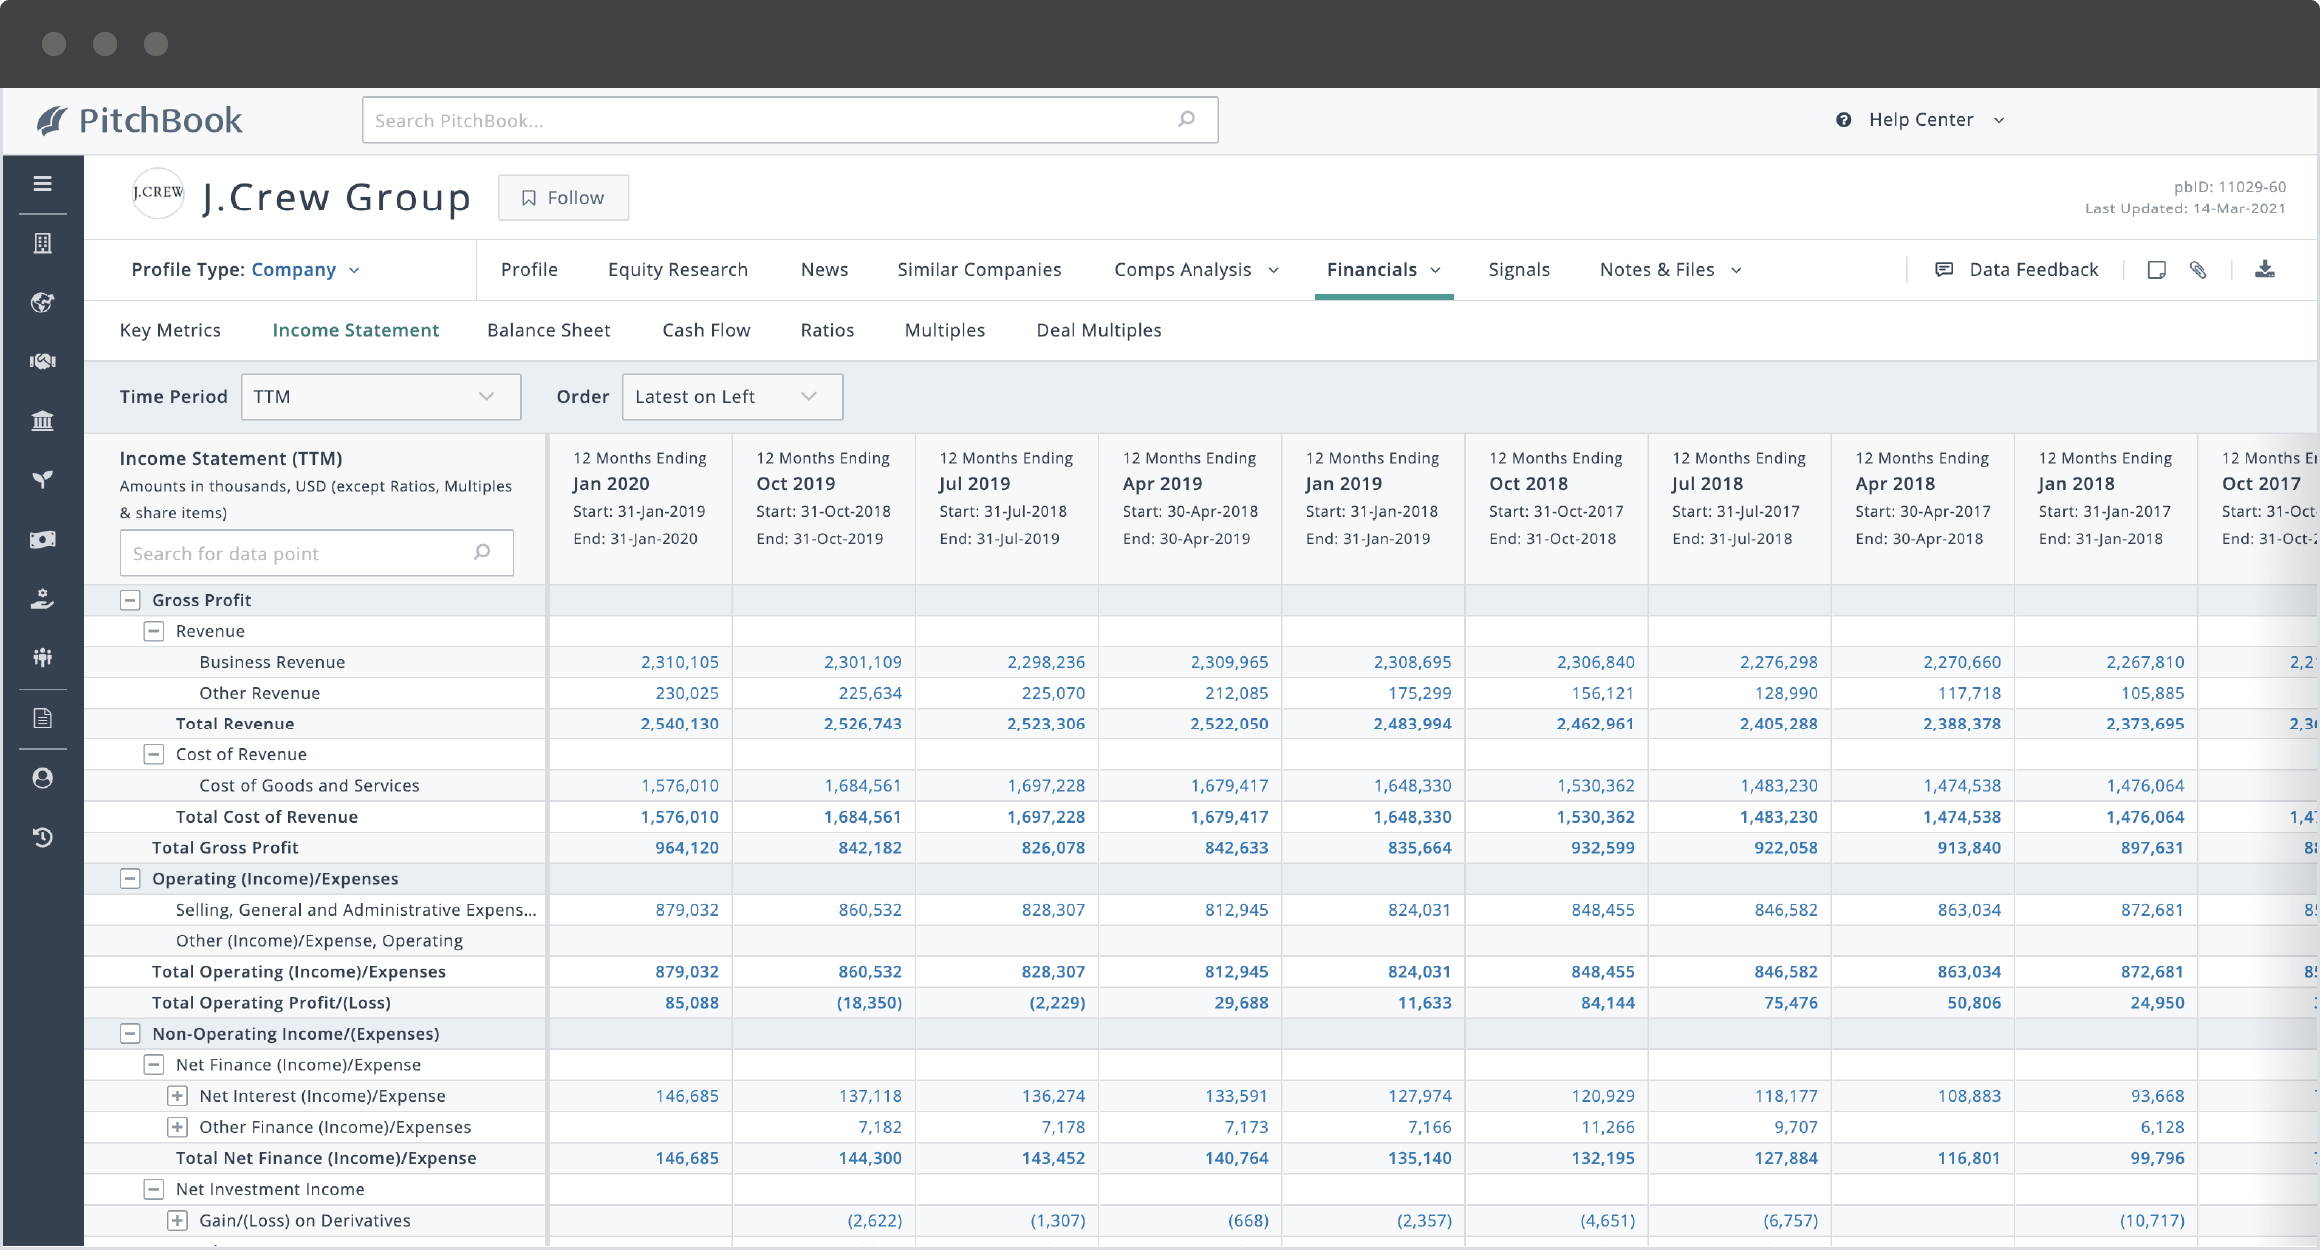 PitchBook company profile showing J. Crew Group’s income statement.